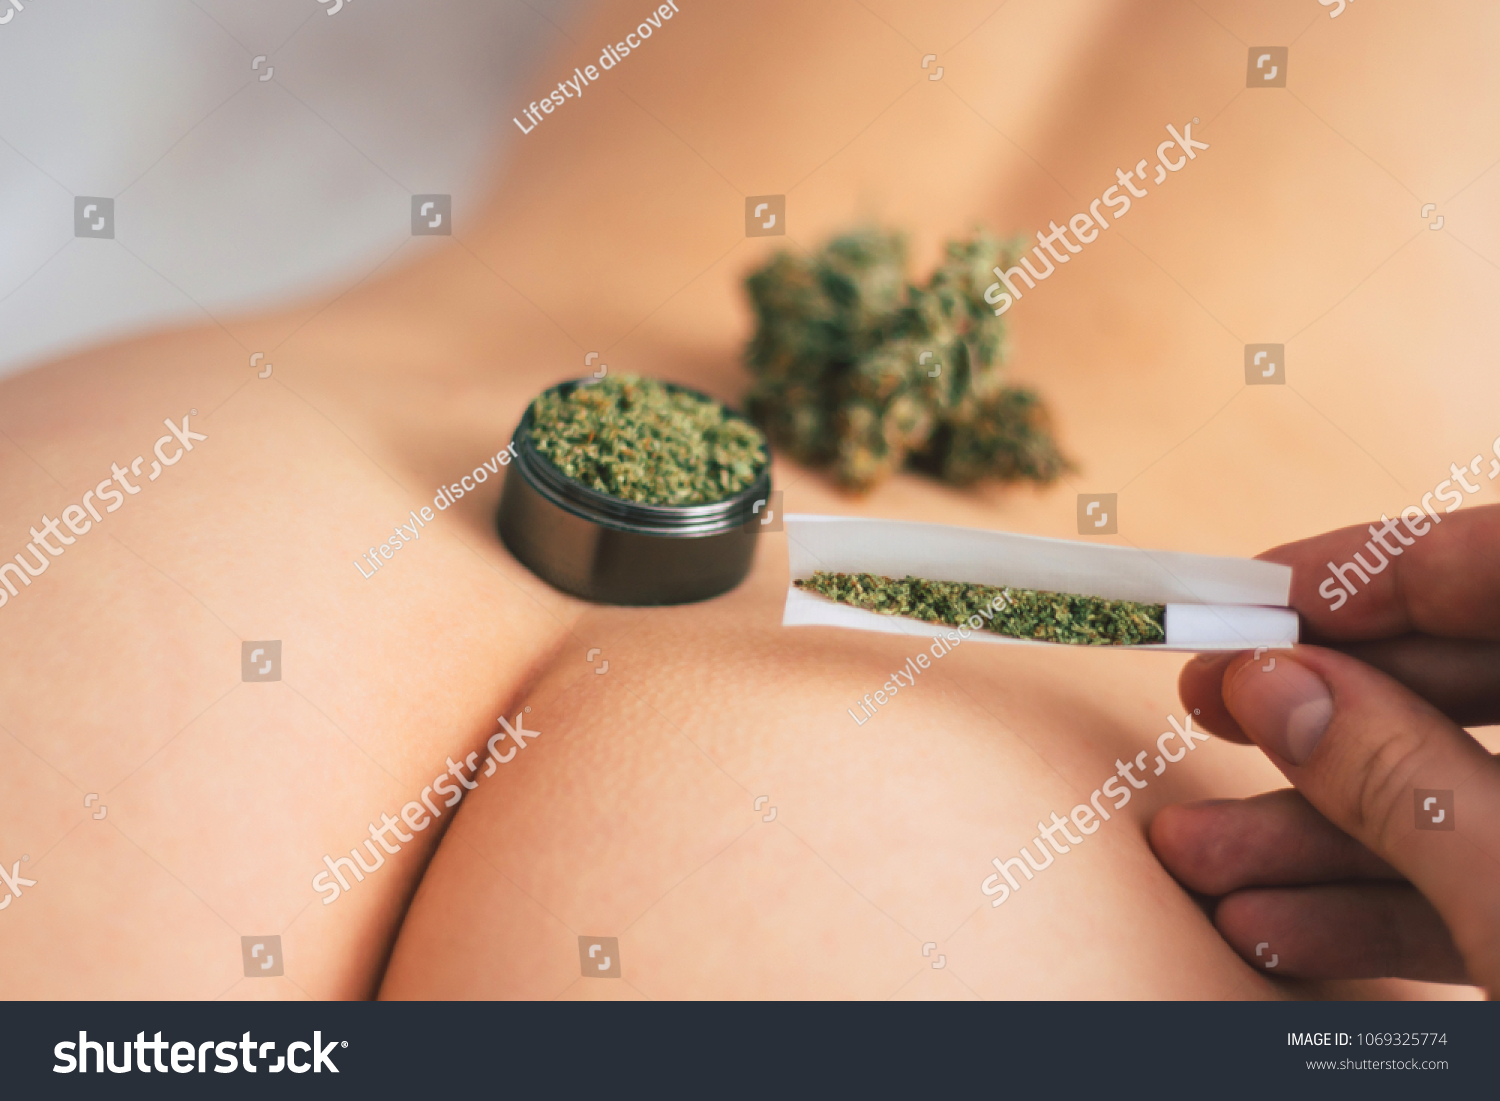 Weed And Sex Girls